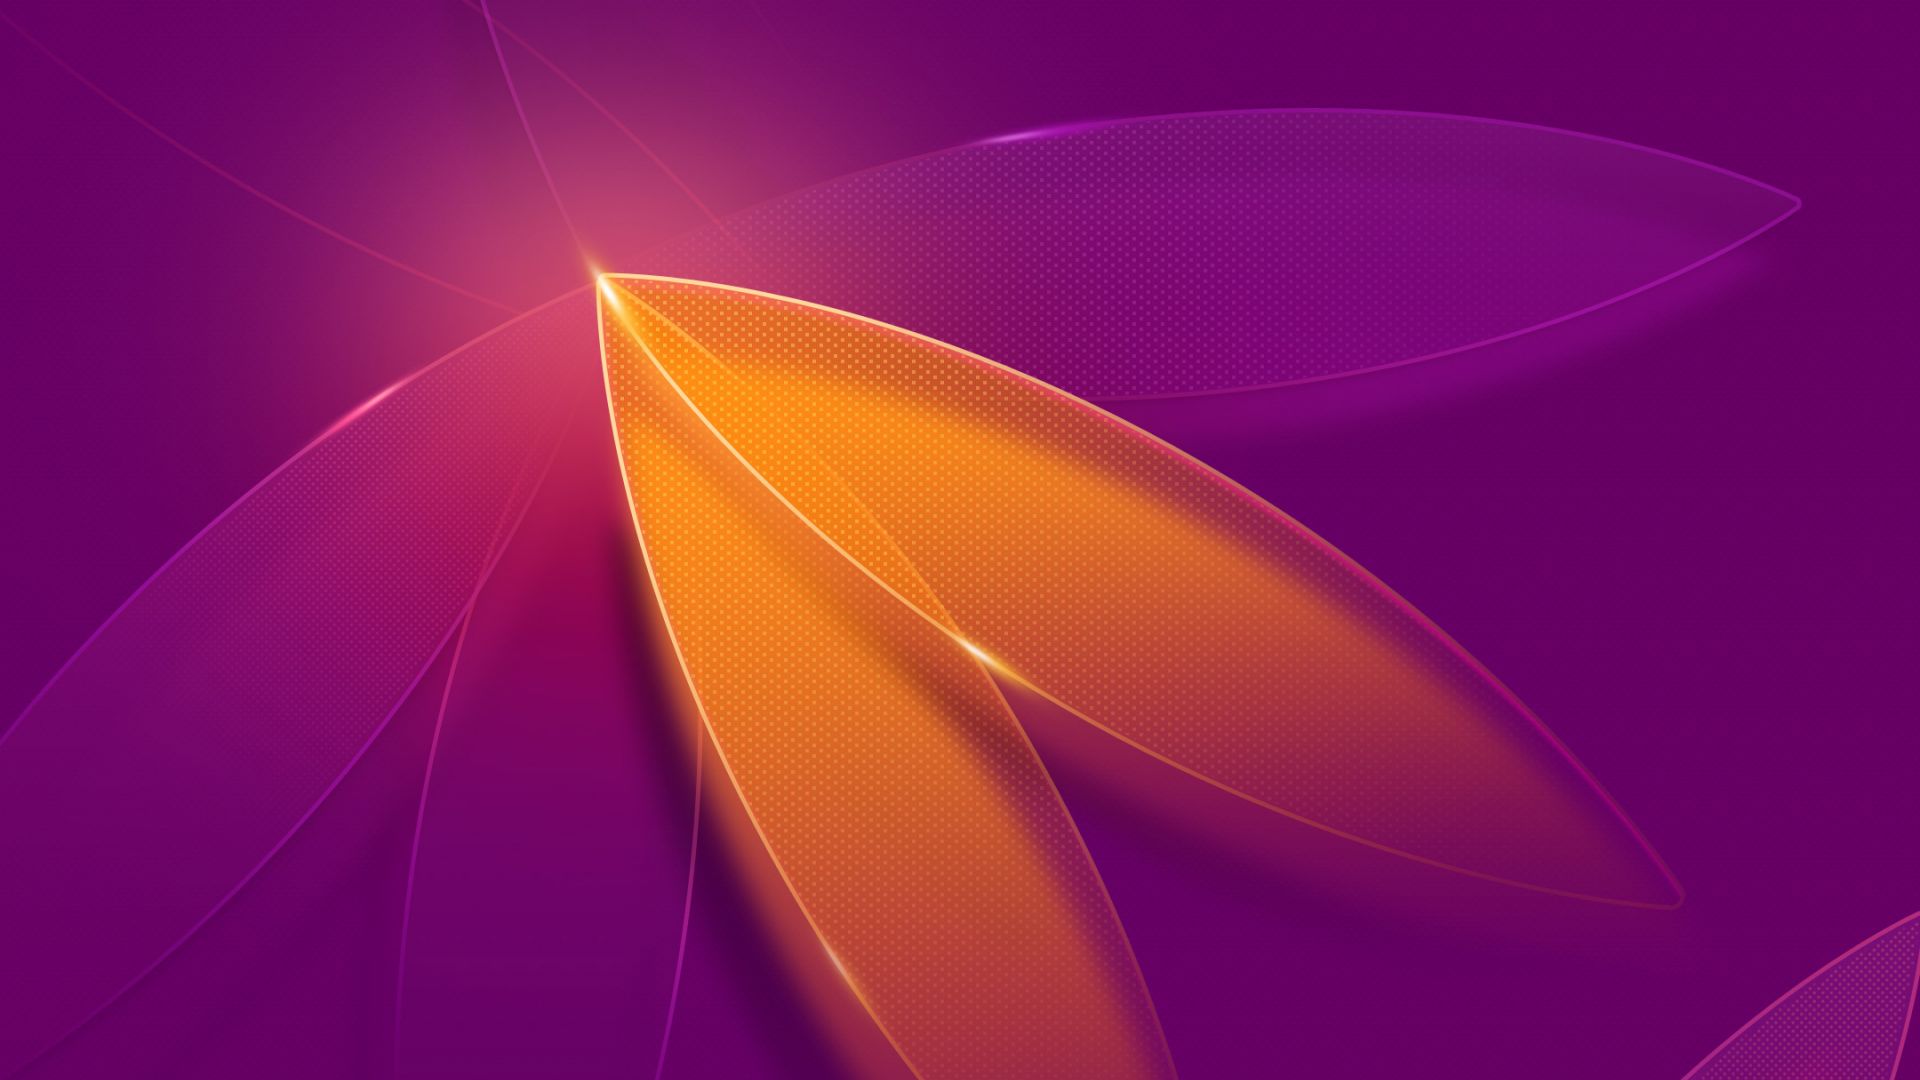 Wallpaper Purple, abstract, floral design